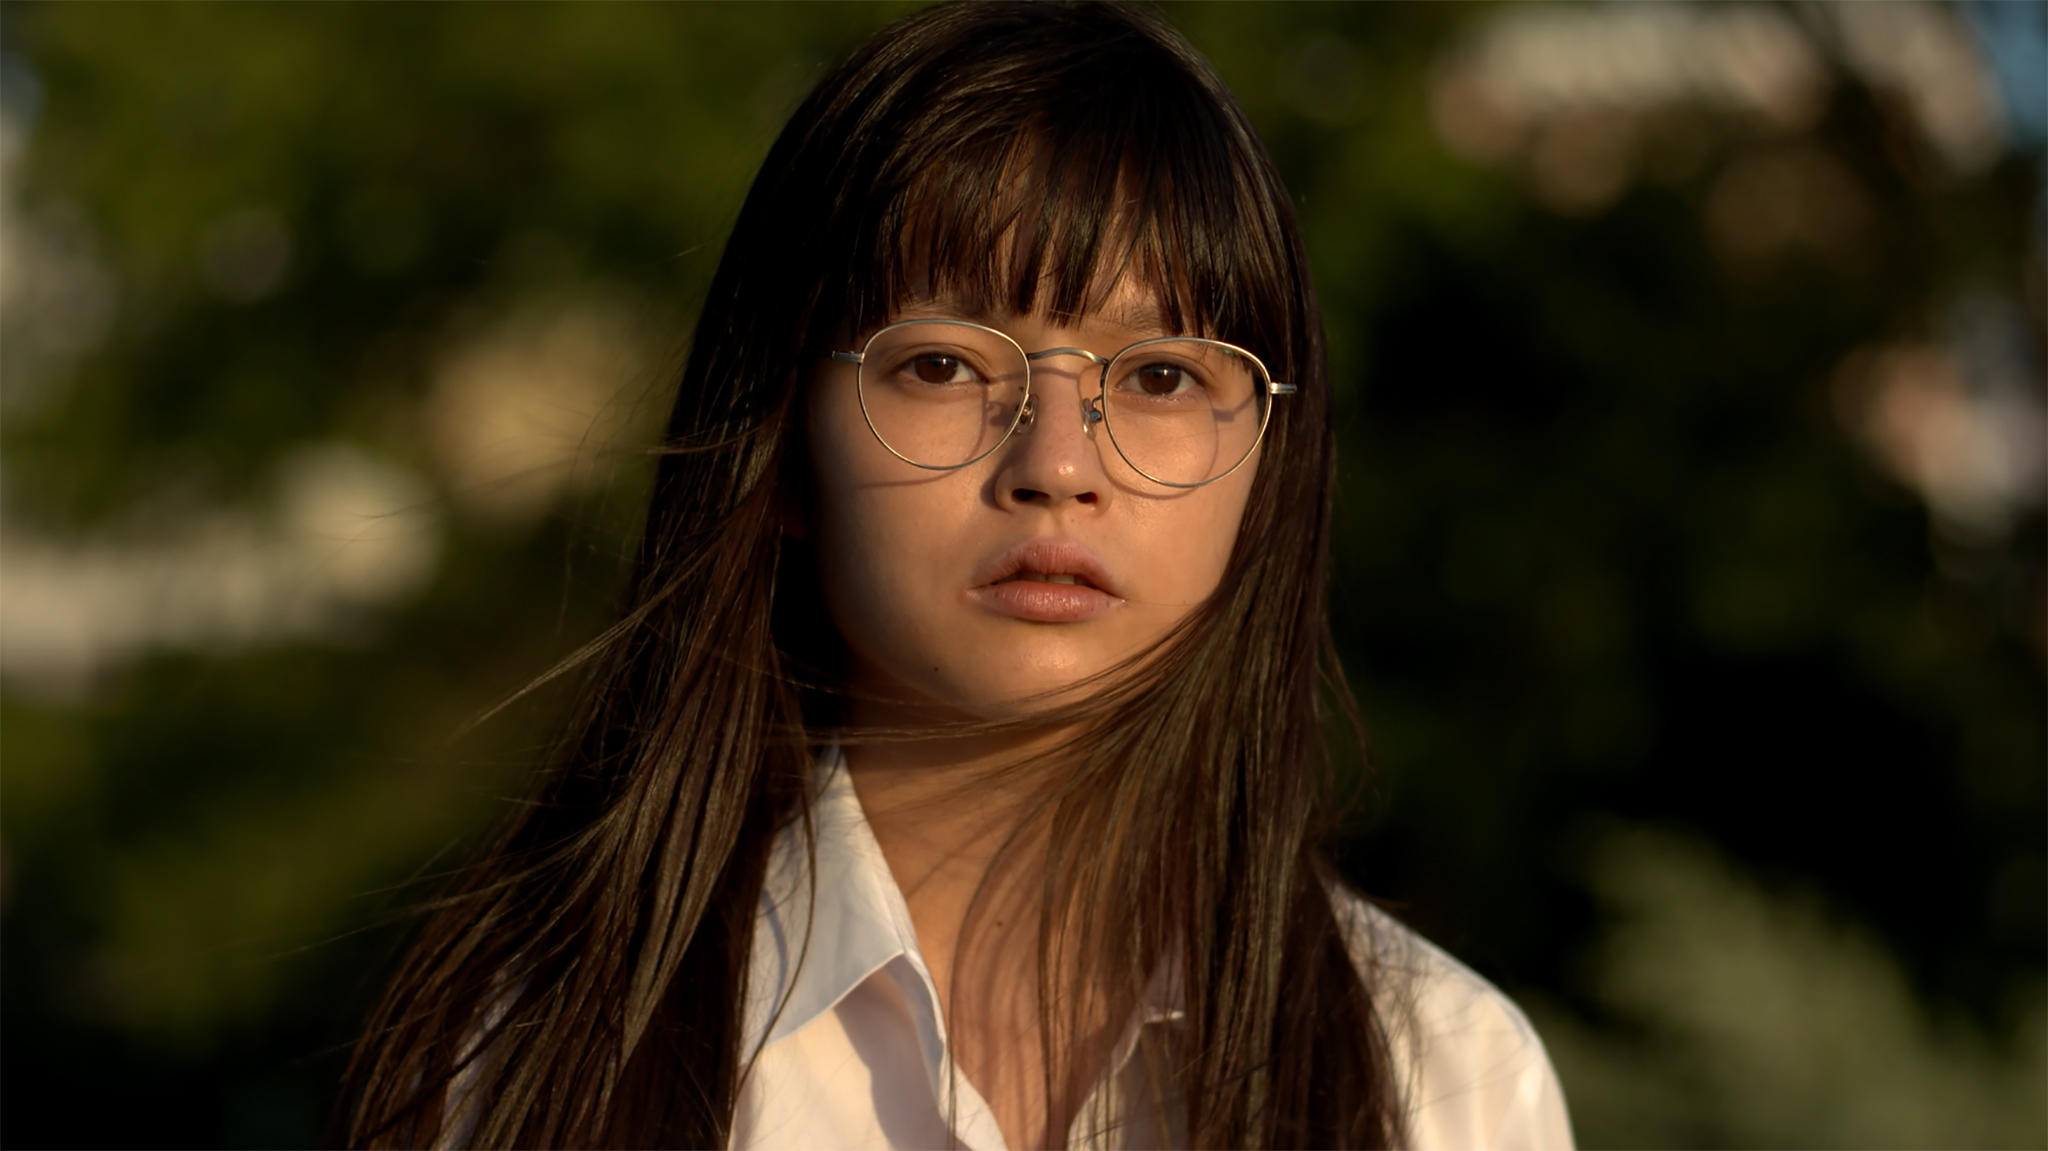 A still of a young Japanese girl with glasses and windswept hair from Maiko Endo's film Tokyo Telepath 2020